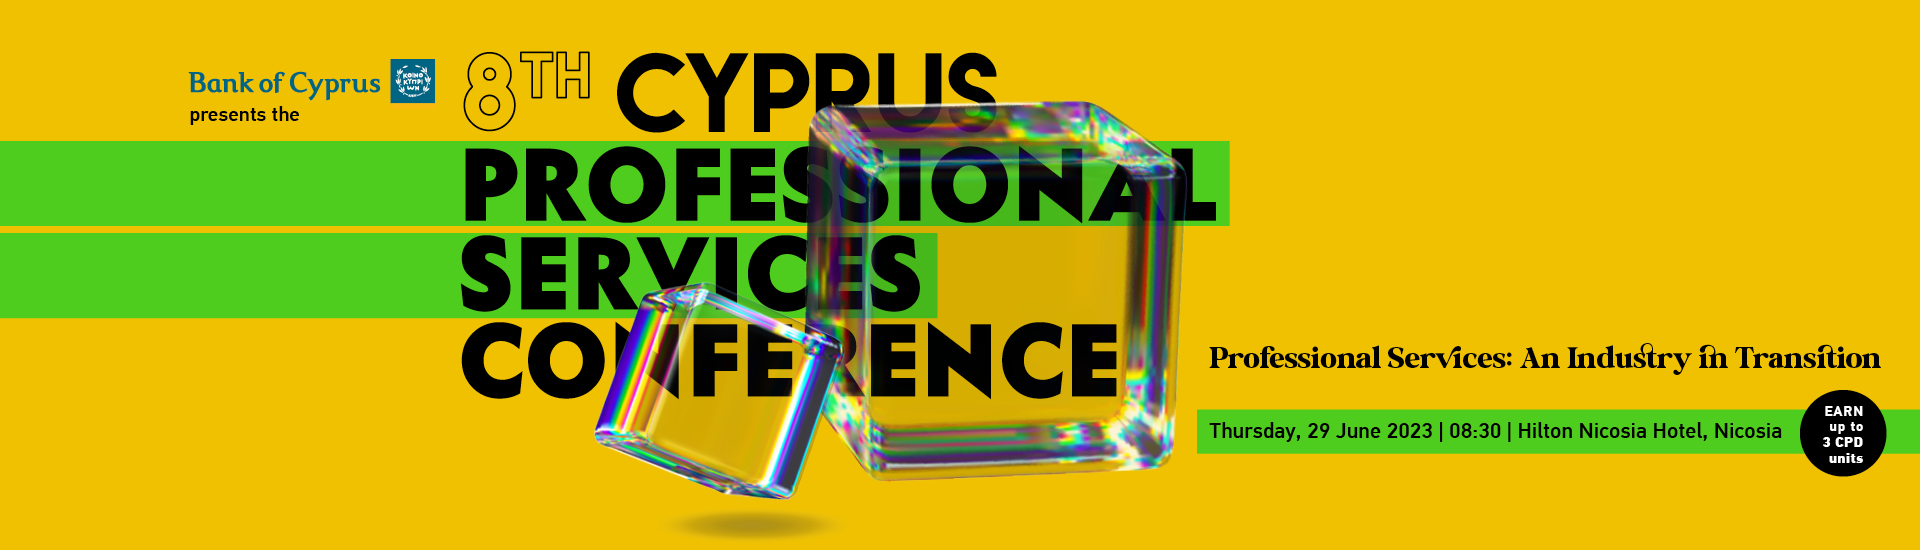 8th Cyprus Professional Services Conference